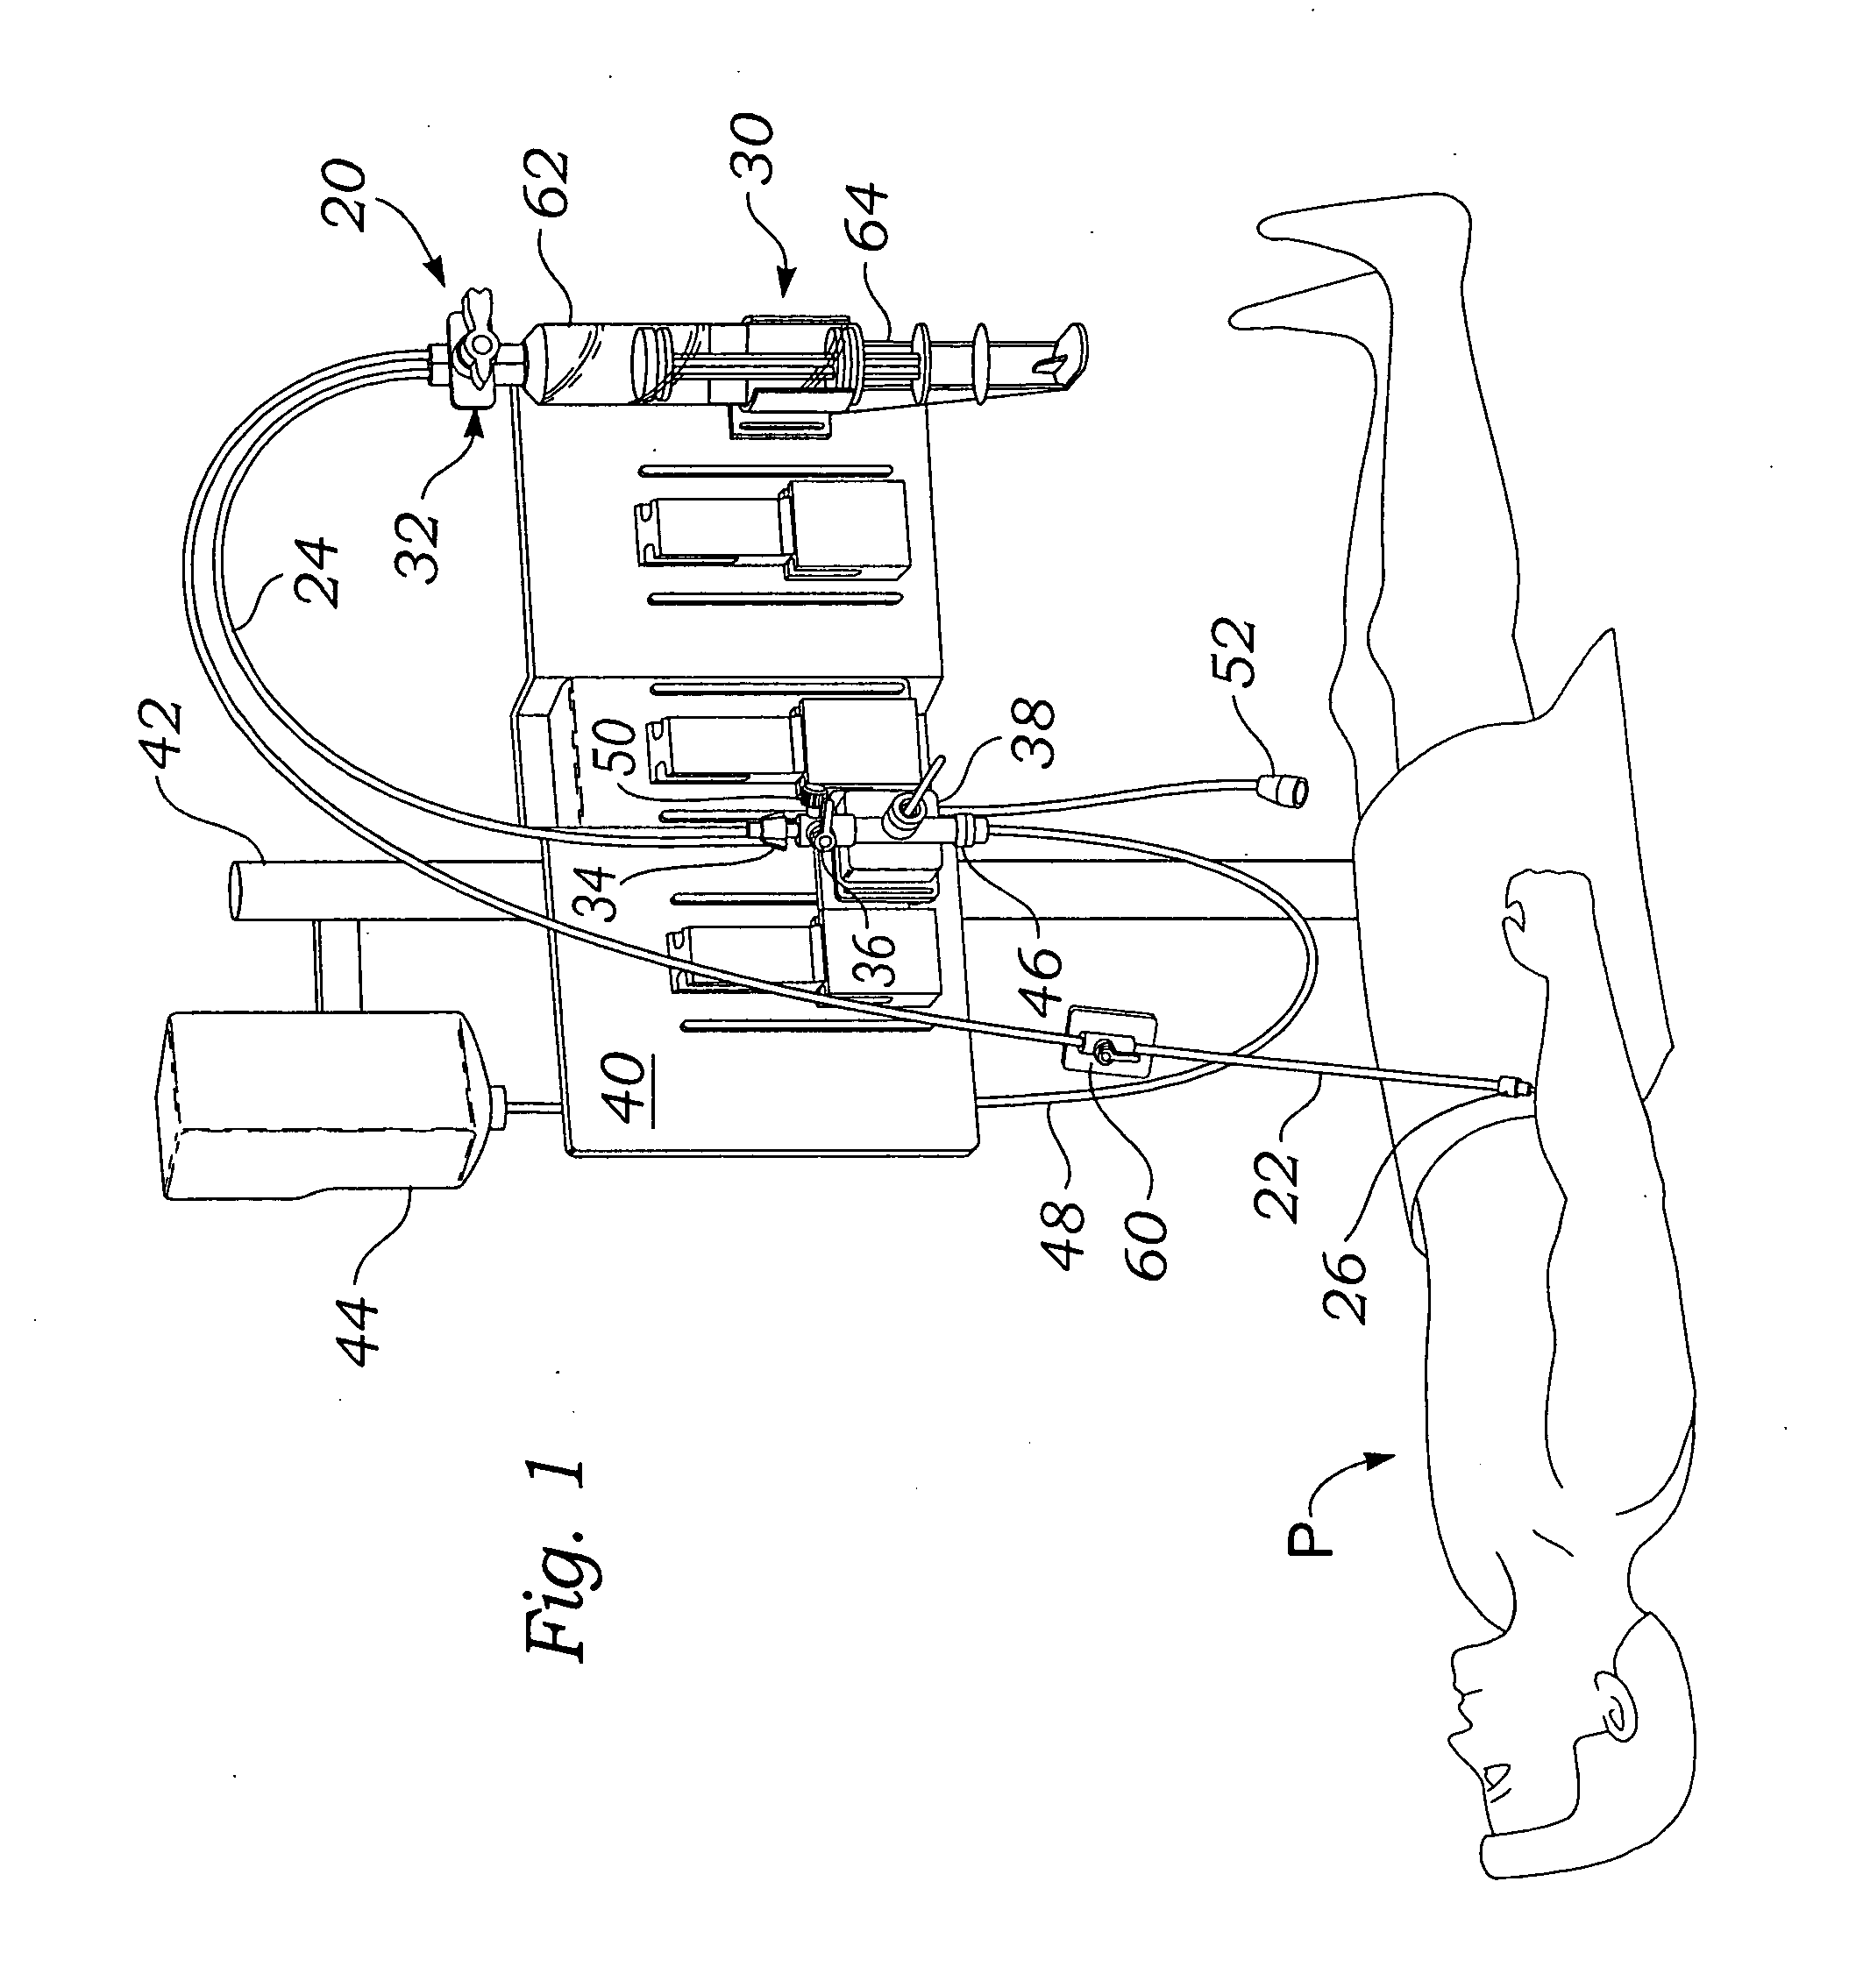 Closed blood sampling system with isolated pressure monitoring